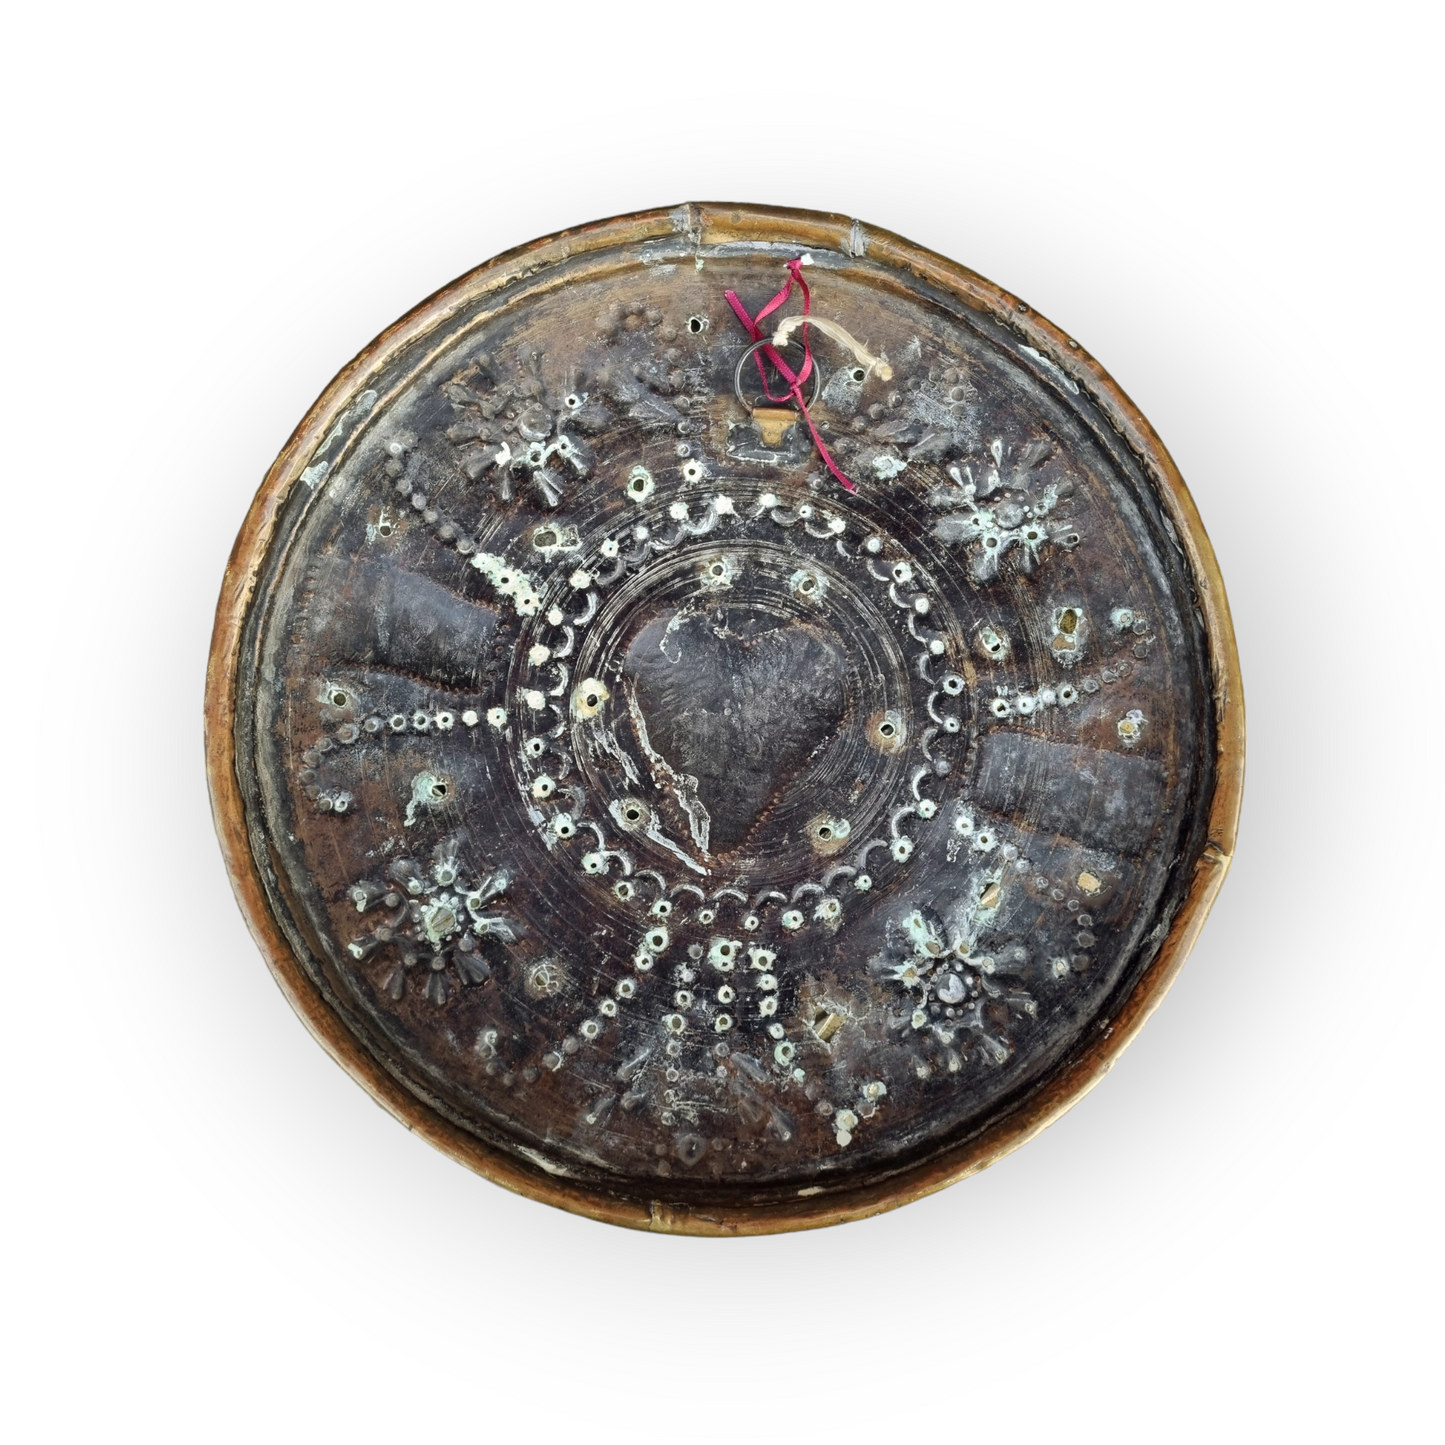 17thC Scottish Antique Brass Repousee-Worked Warming Pan Lid Decorated With A Love Heart